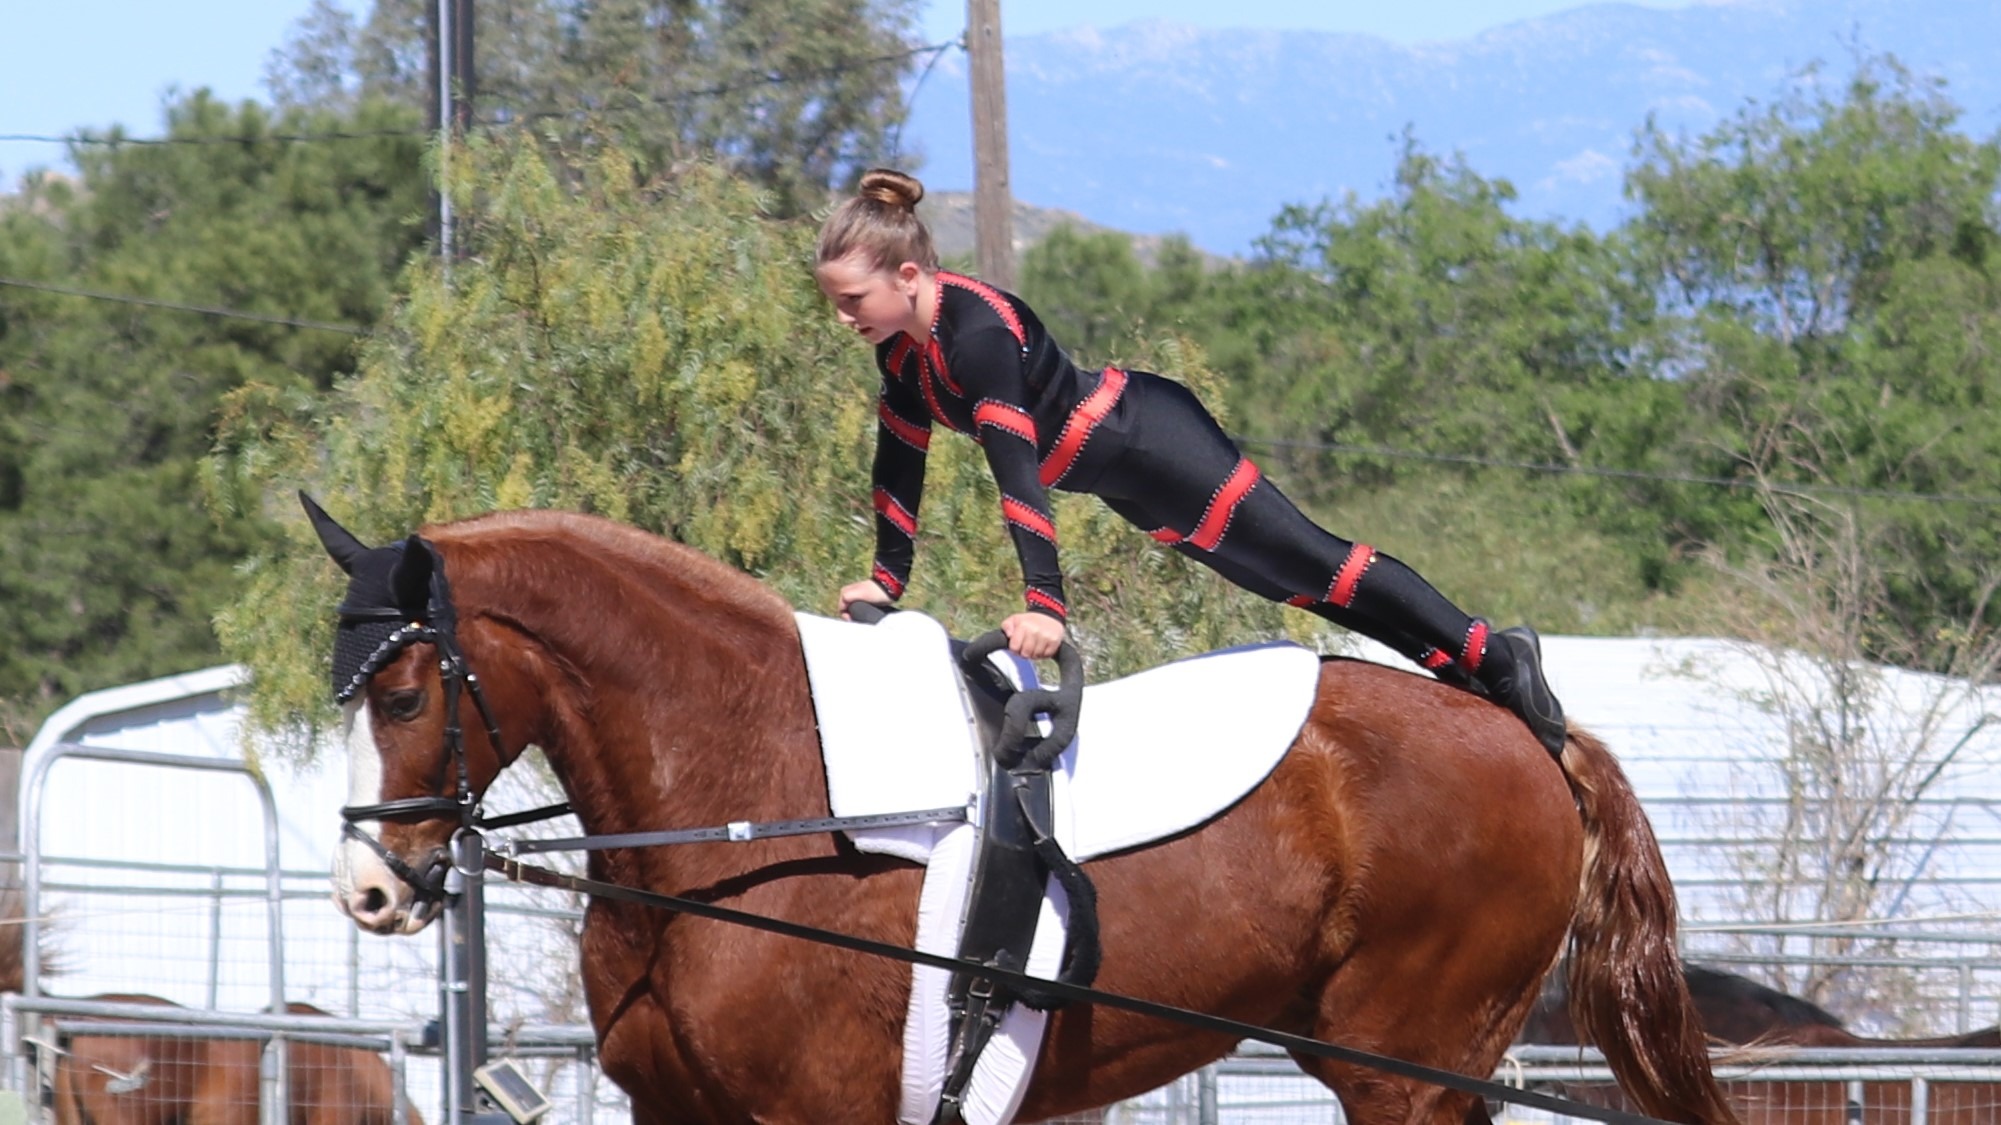 Roro competing at a vaulting competition in ContenderWear